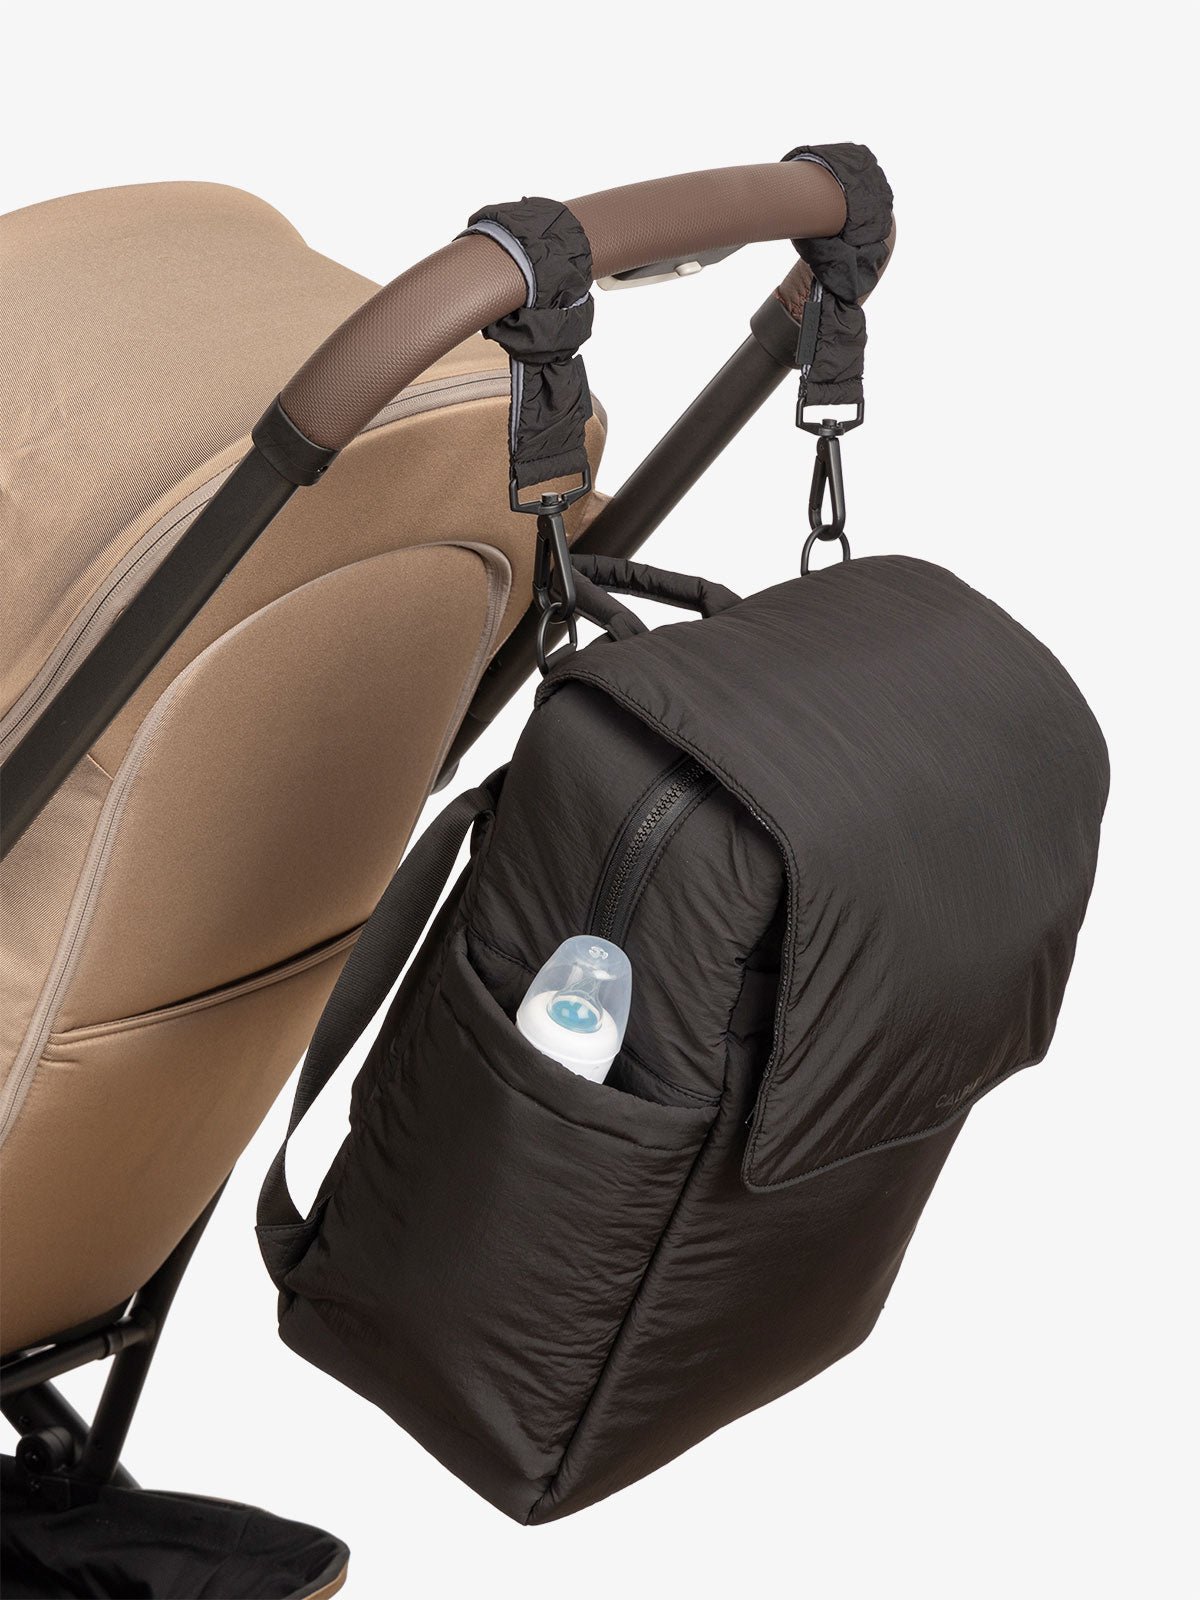 CALPAK Diaper Backpack with Laptop Sleeve attached to stroller by CALPAK Stroller Straps in black